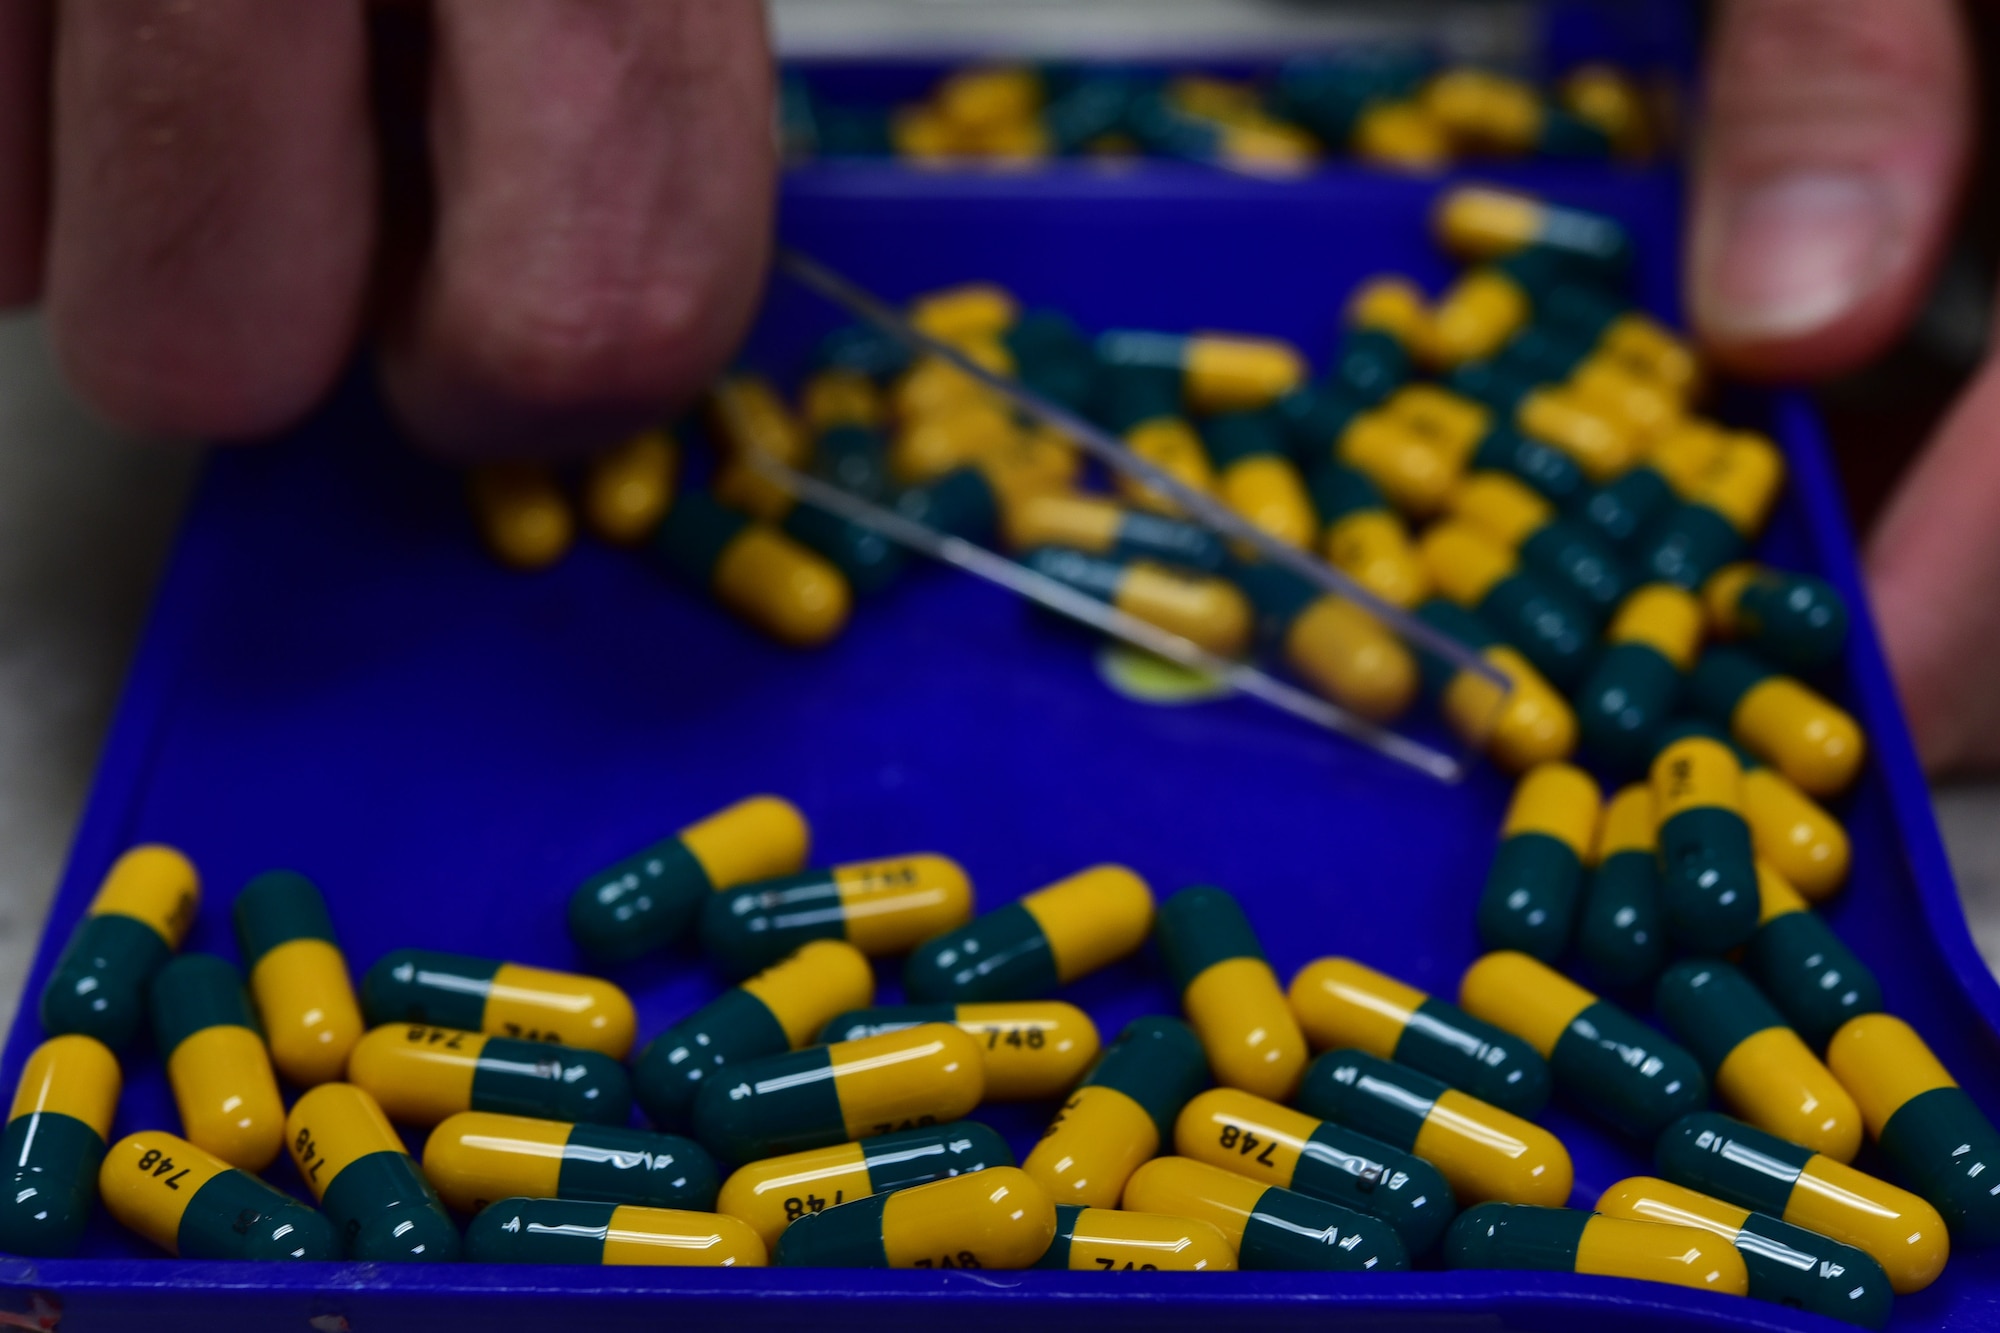 Airman 1st Class Joshua White, 19th Medical Support Squadron pharmacy technician, counts pill capsules Aug. 24, 2017 at Little Rock Air Force Base, Ark. Airmen going to areas prone to malaria are given Doxycycline and Primaquine tablets before they leave to help combat the disease. (U.S. Air Force photo by Airman Rhett Isbell)